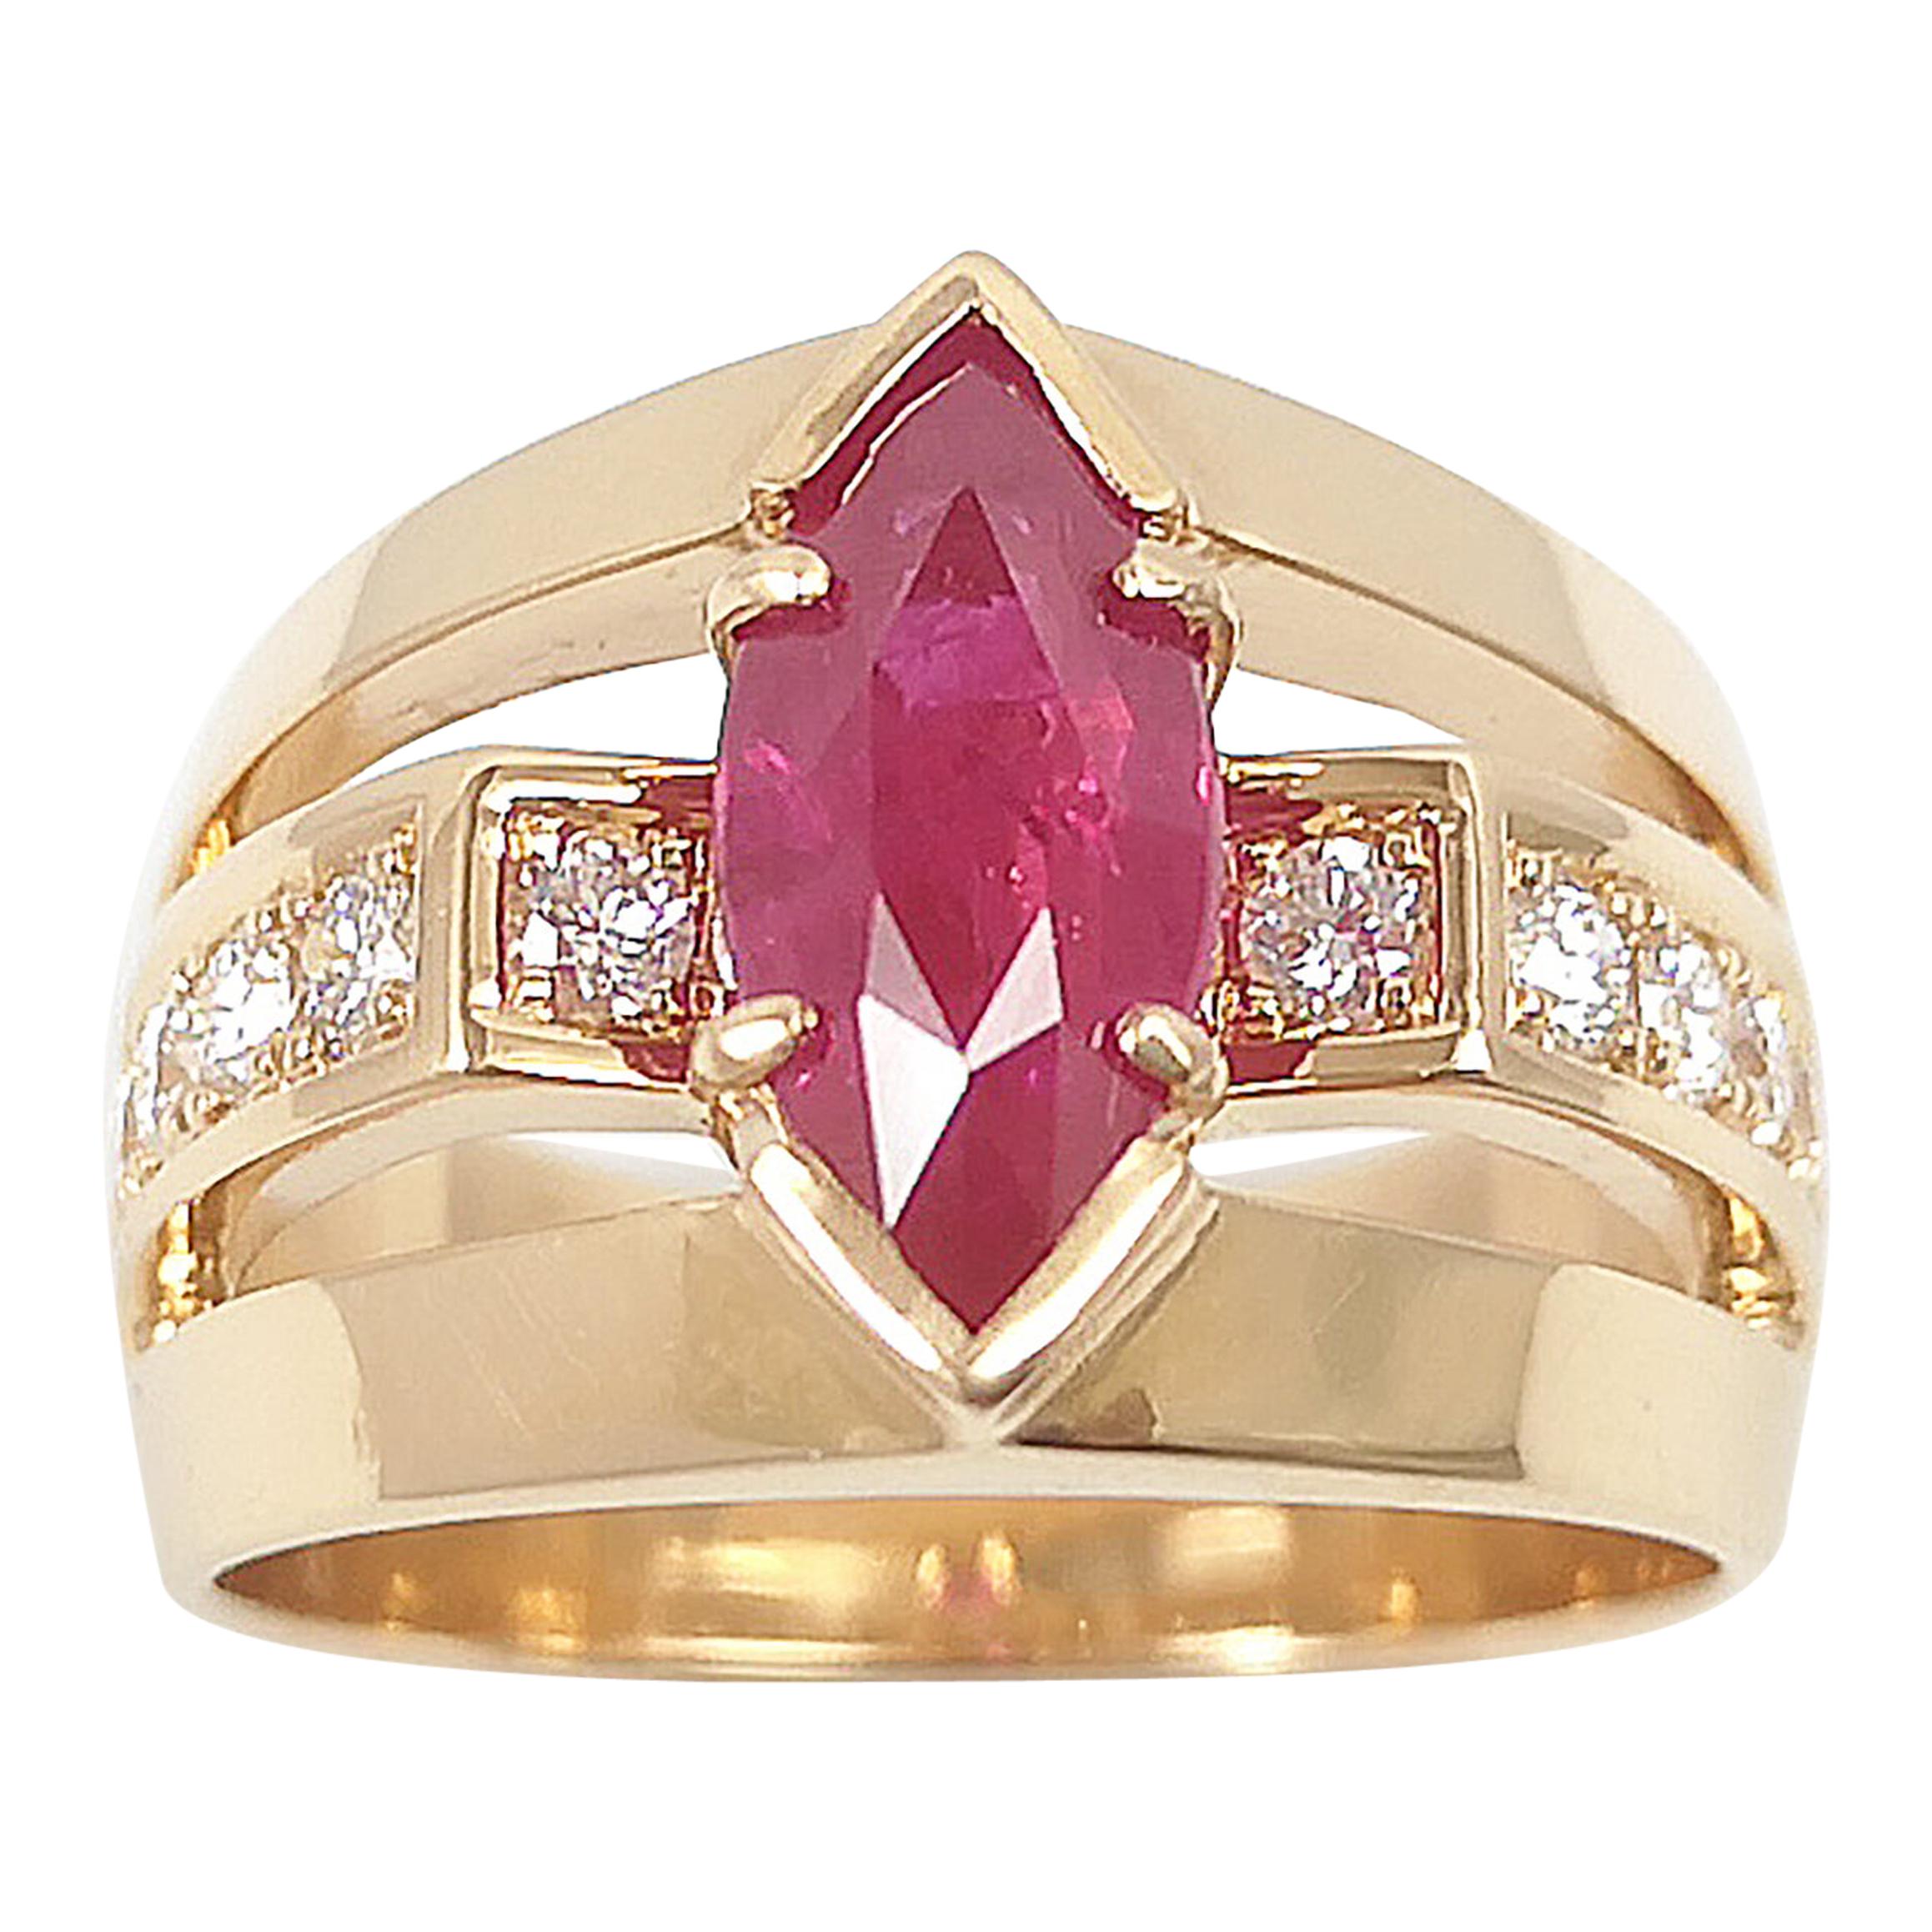 Marquise Ruby with Diamond Ring Set in 18 Karat Rose Gold Settings